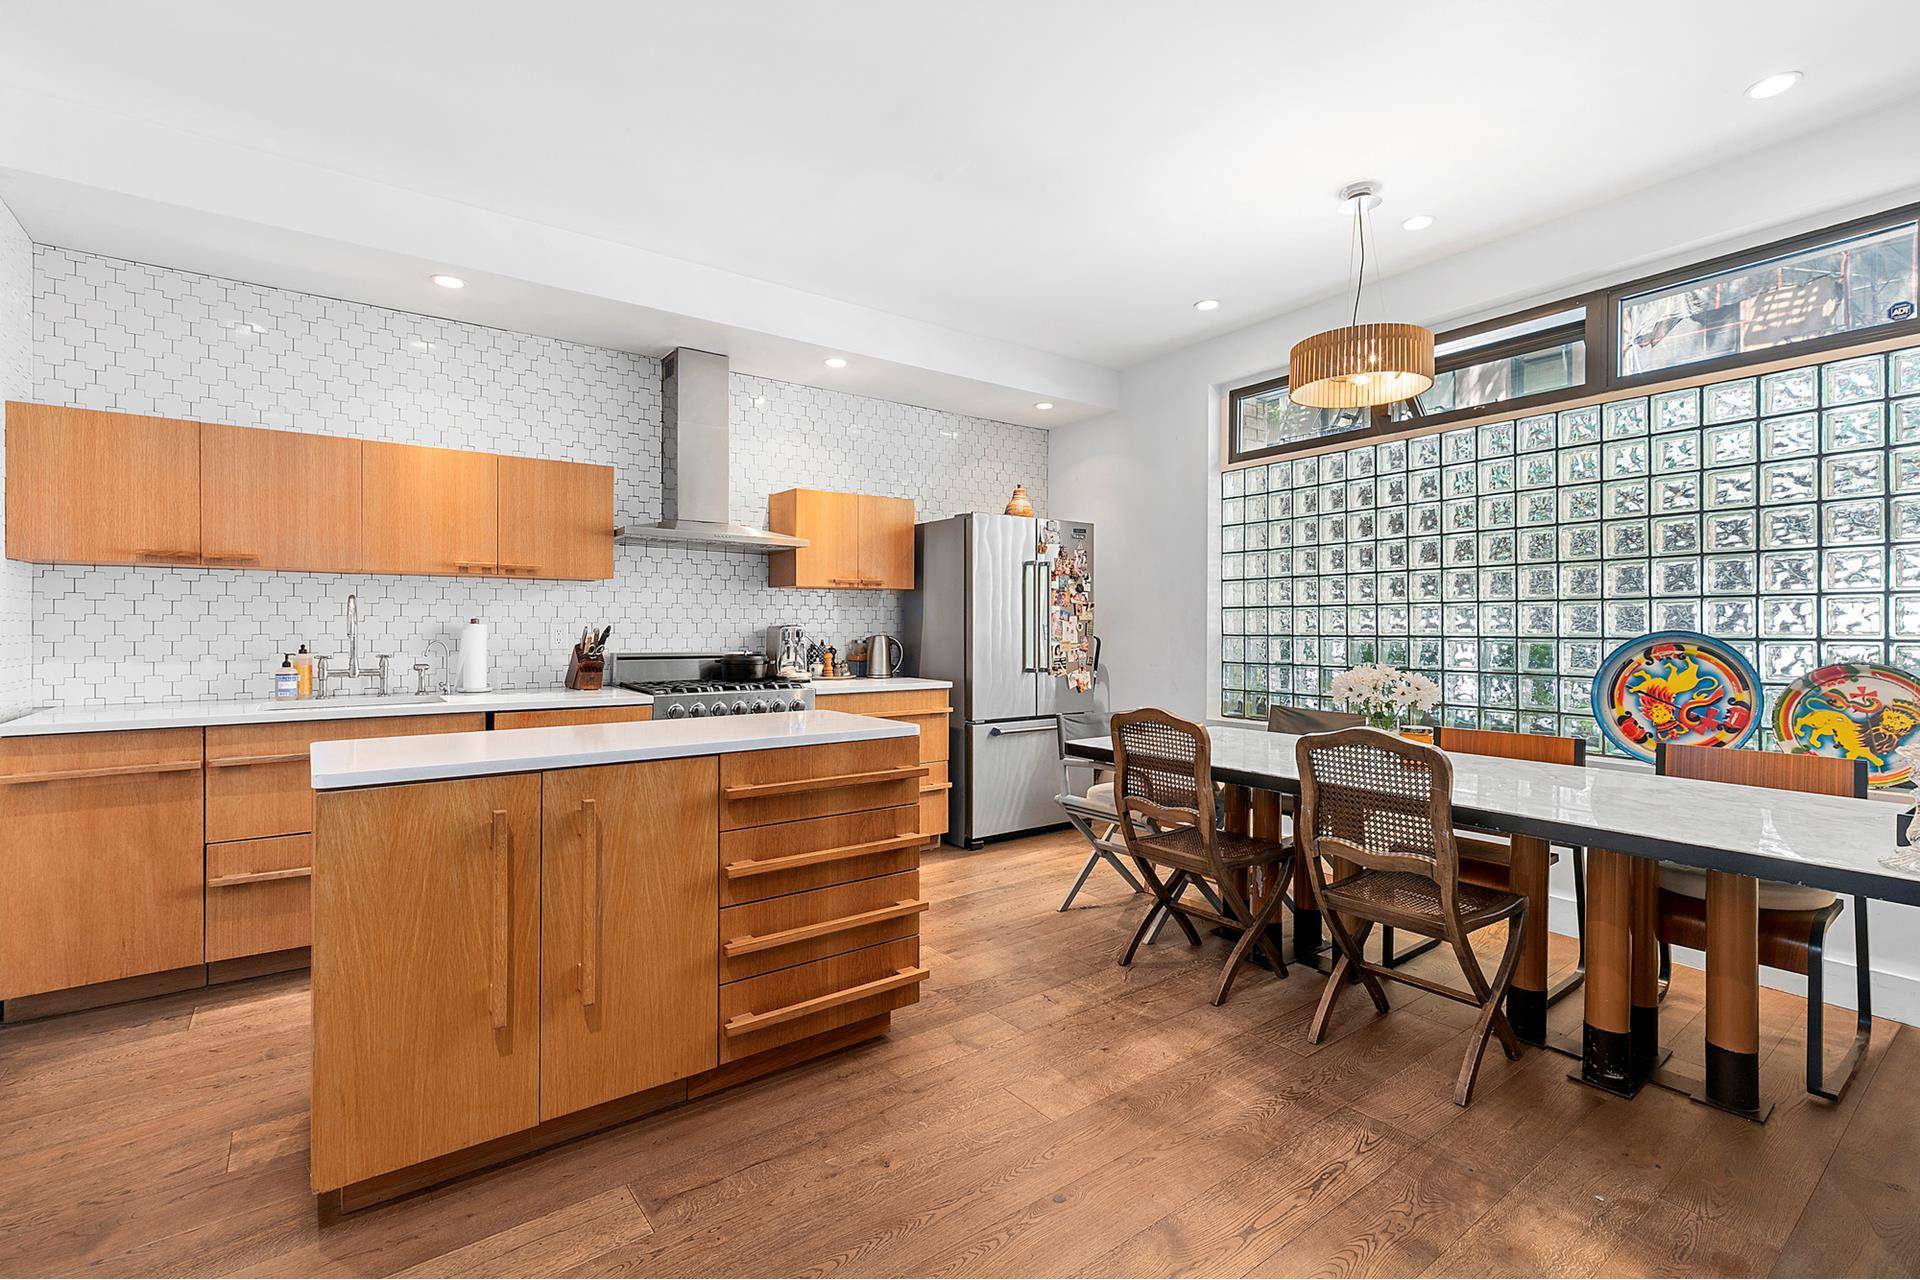 6 Morton Street is a charming, single family townhouse located on a tree lined block in the heart of the West Village.